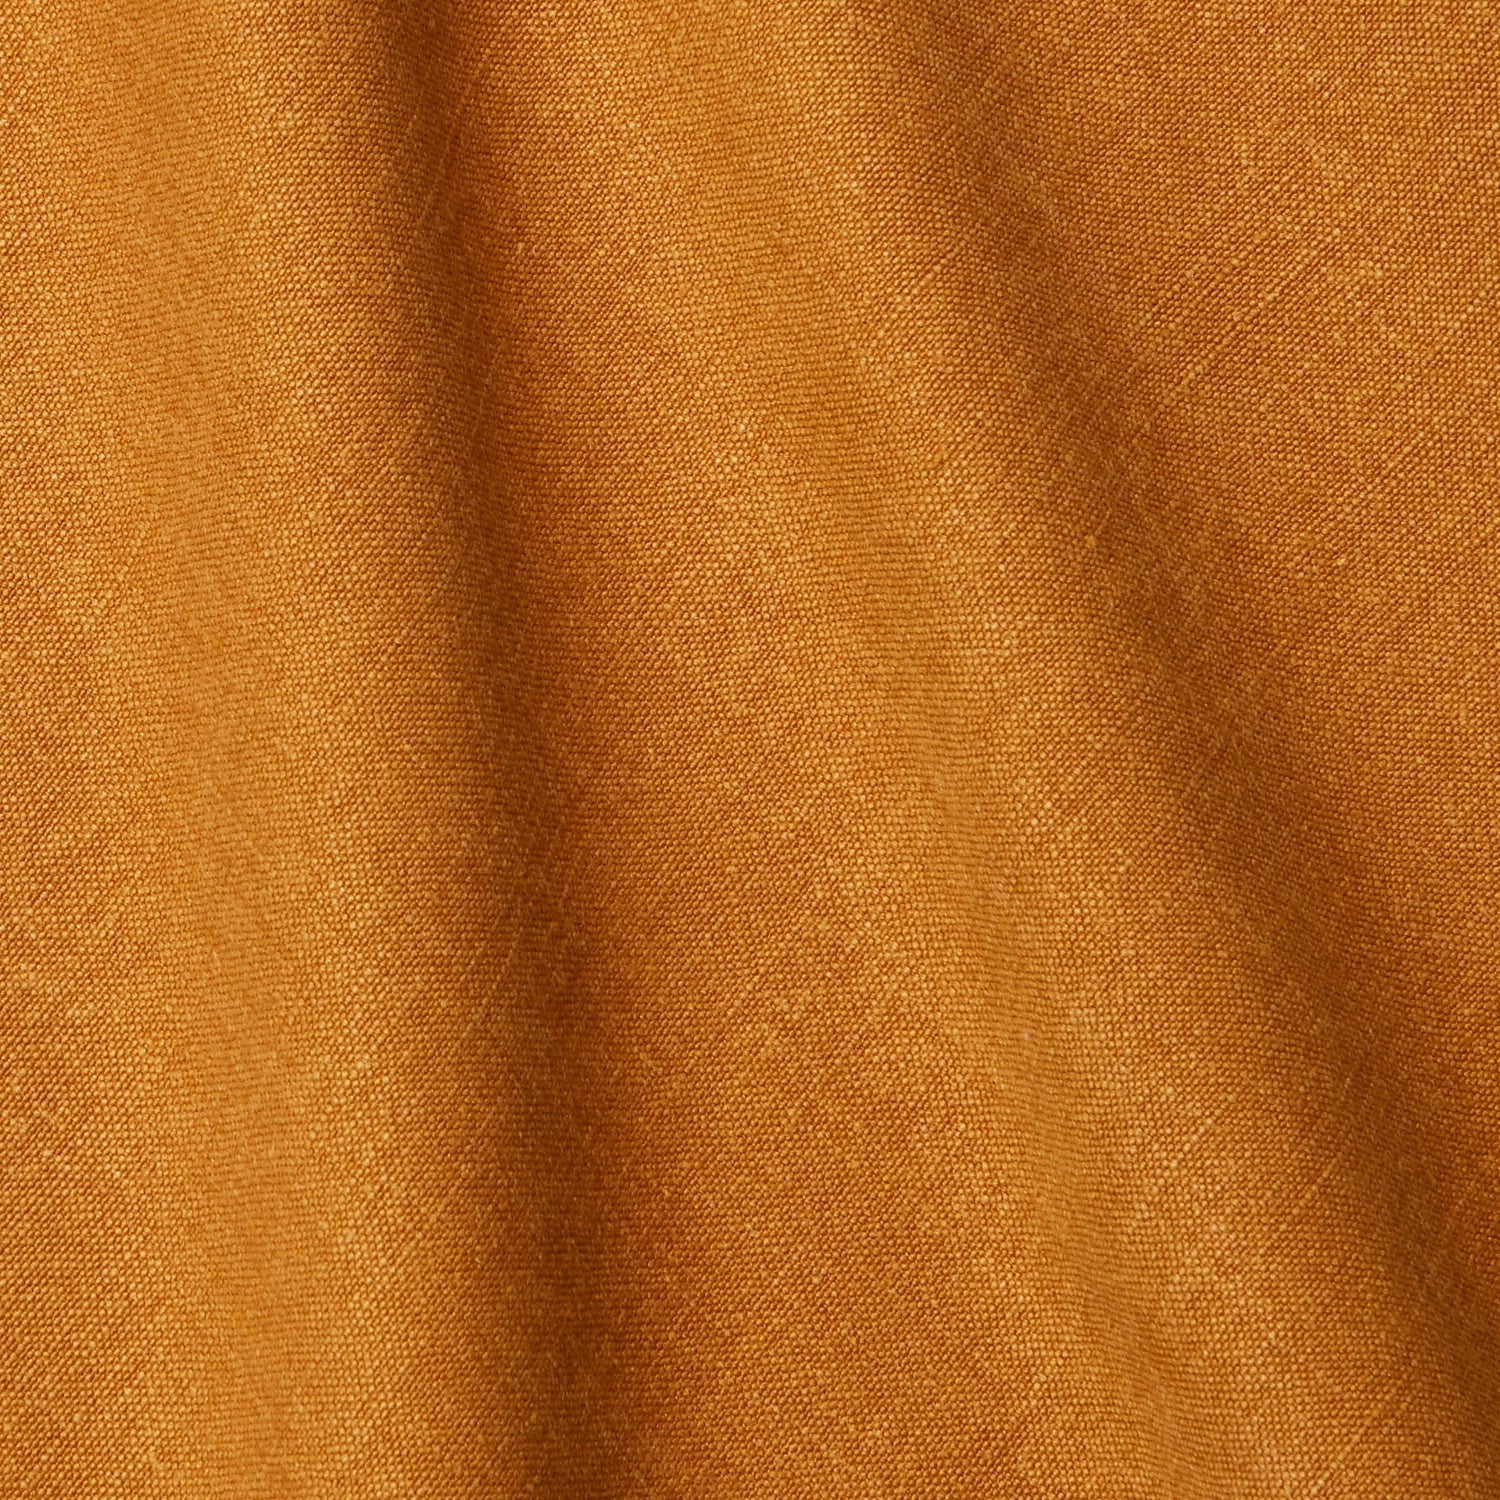 A draped swatch of linen fabric in a solid gold color.